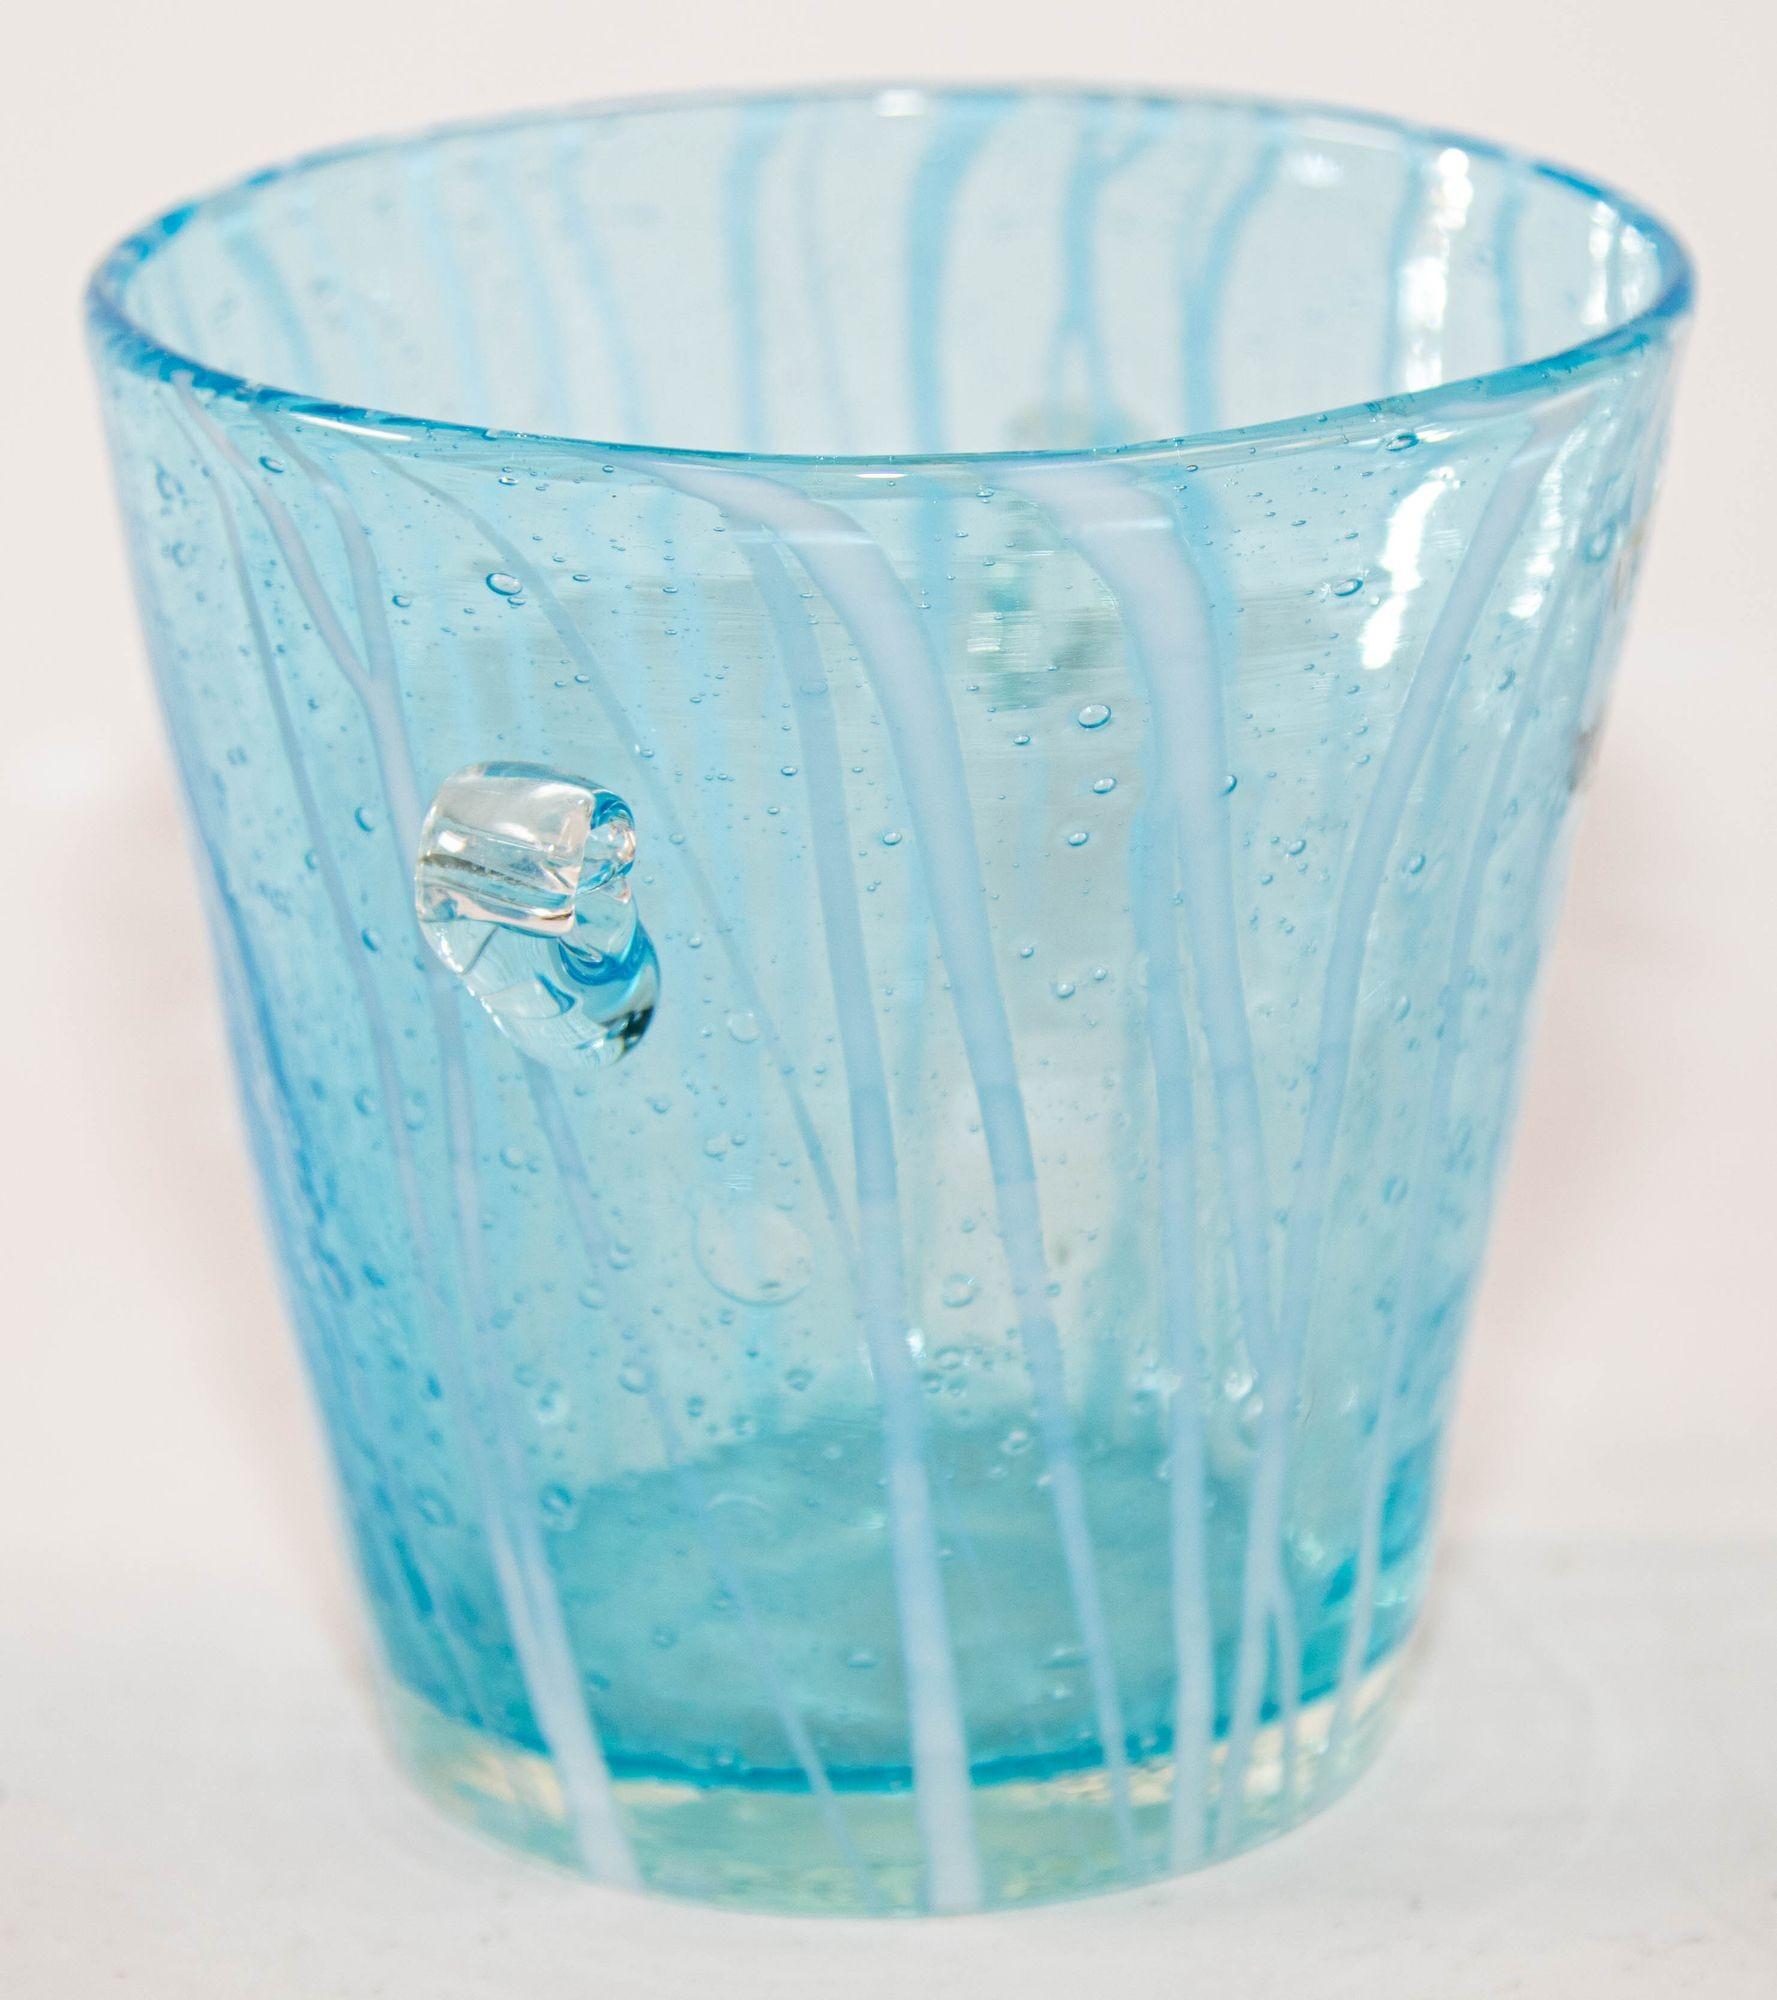 1970s Vintage Venini Murano Light Blue White Clear Wine Cooler Ice Bucket Made in Italy.
handcrafted Italian Murano Venini venetian art glass ice bucket .
This is a delicate blown Murano art glass ice bucket.
It has a flared shape from the base to